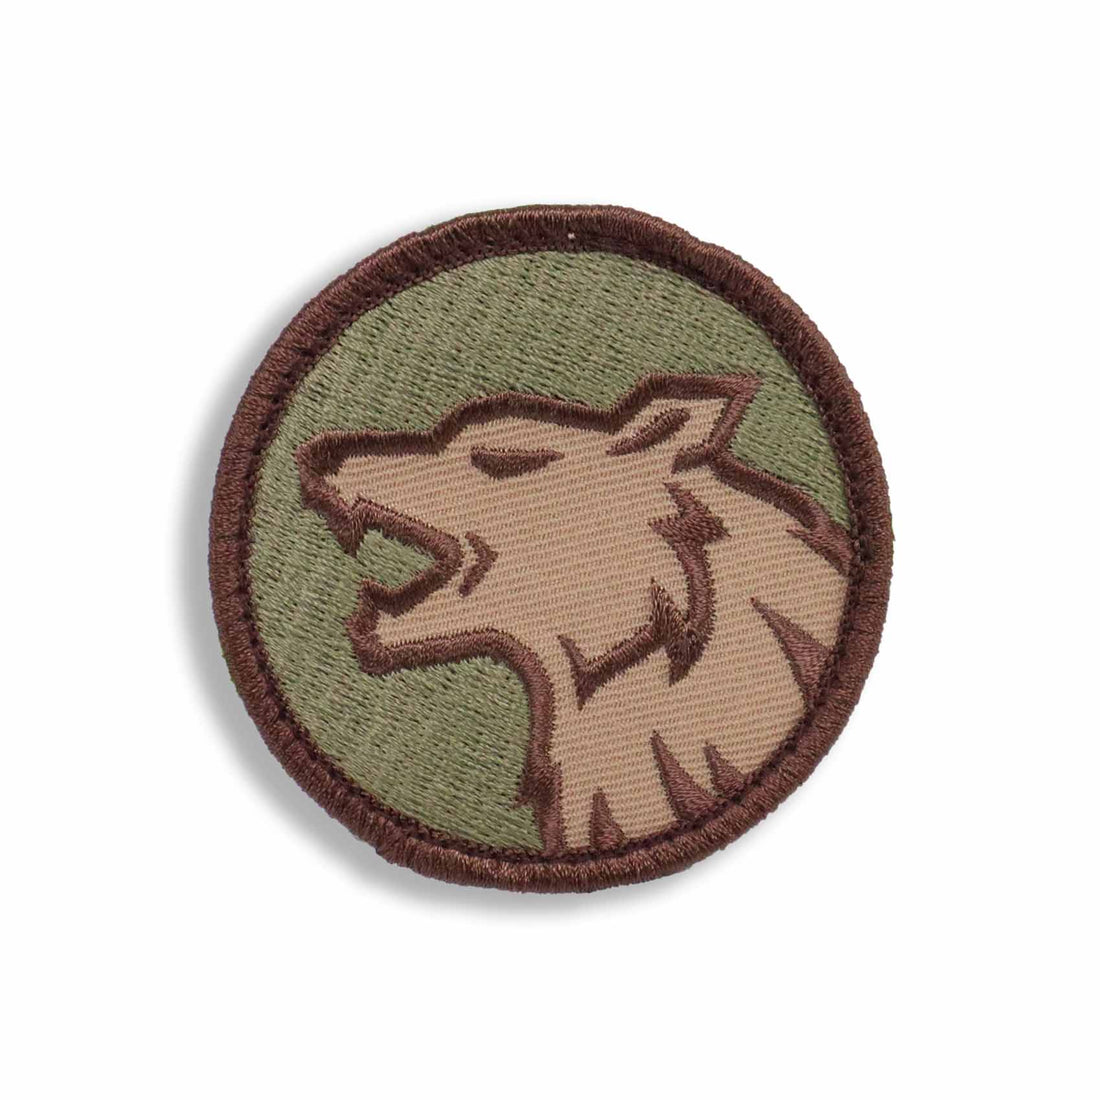 Supplies - Identification - Morale Patches - Mil-Spec Monkey Wolf Head Patch